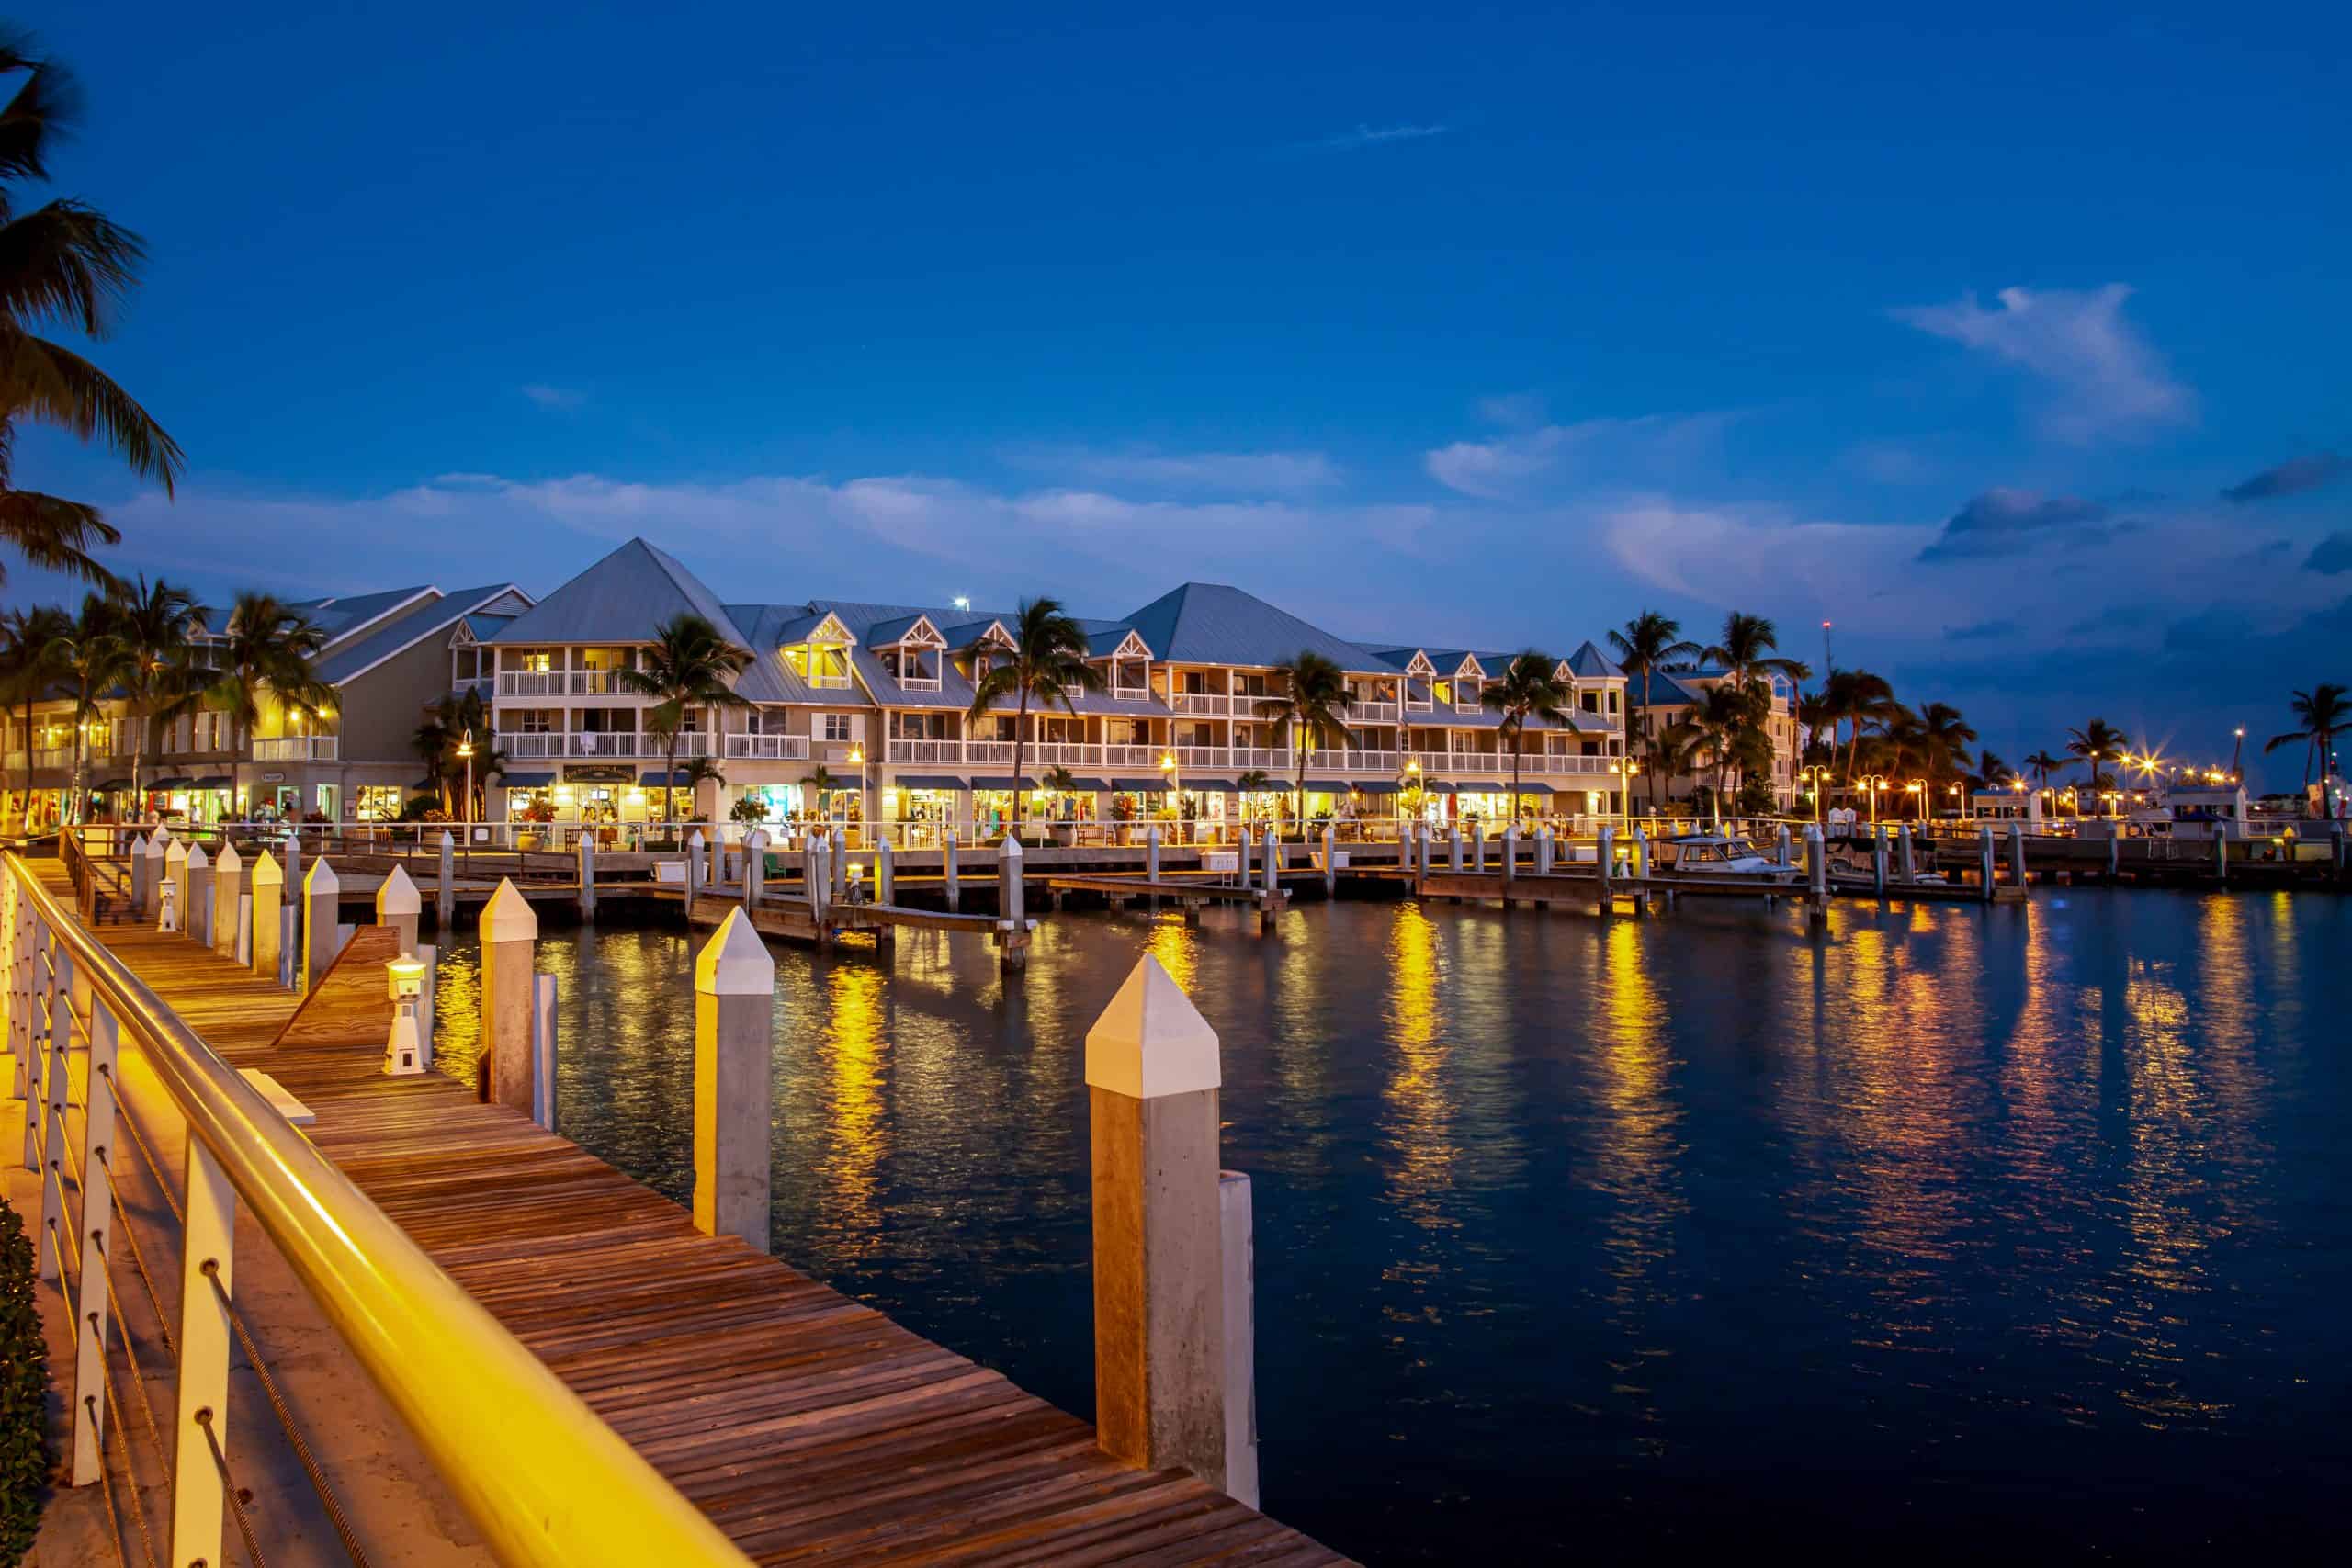 10 Best Things To Do In Key West At Night - Florida Trippers